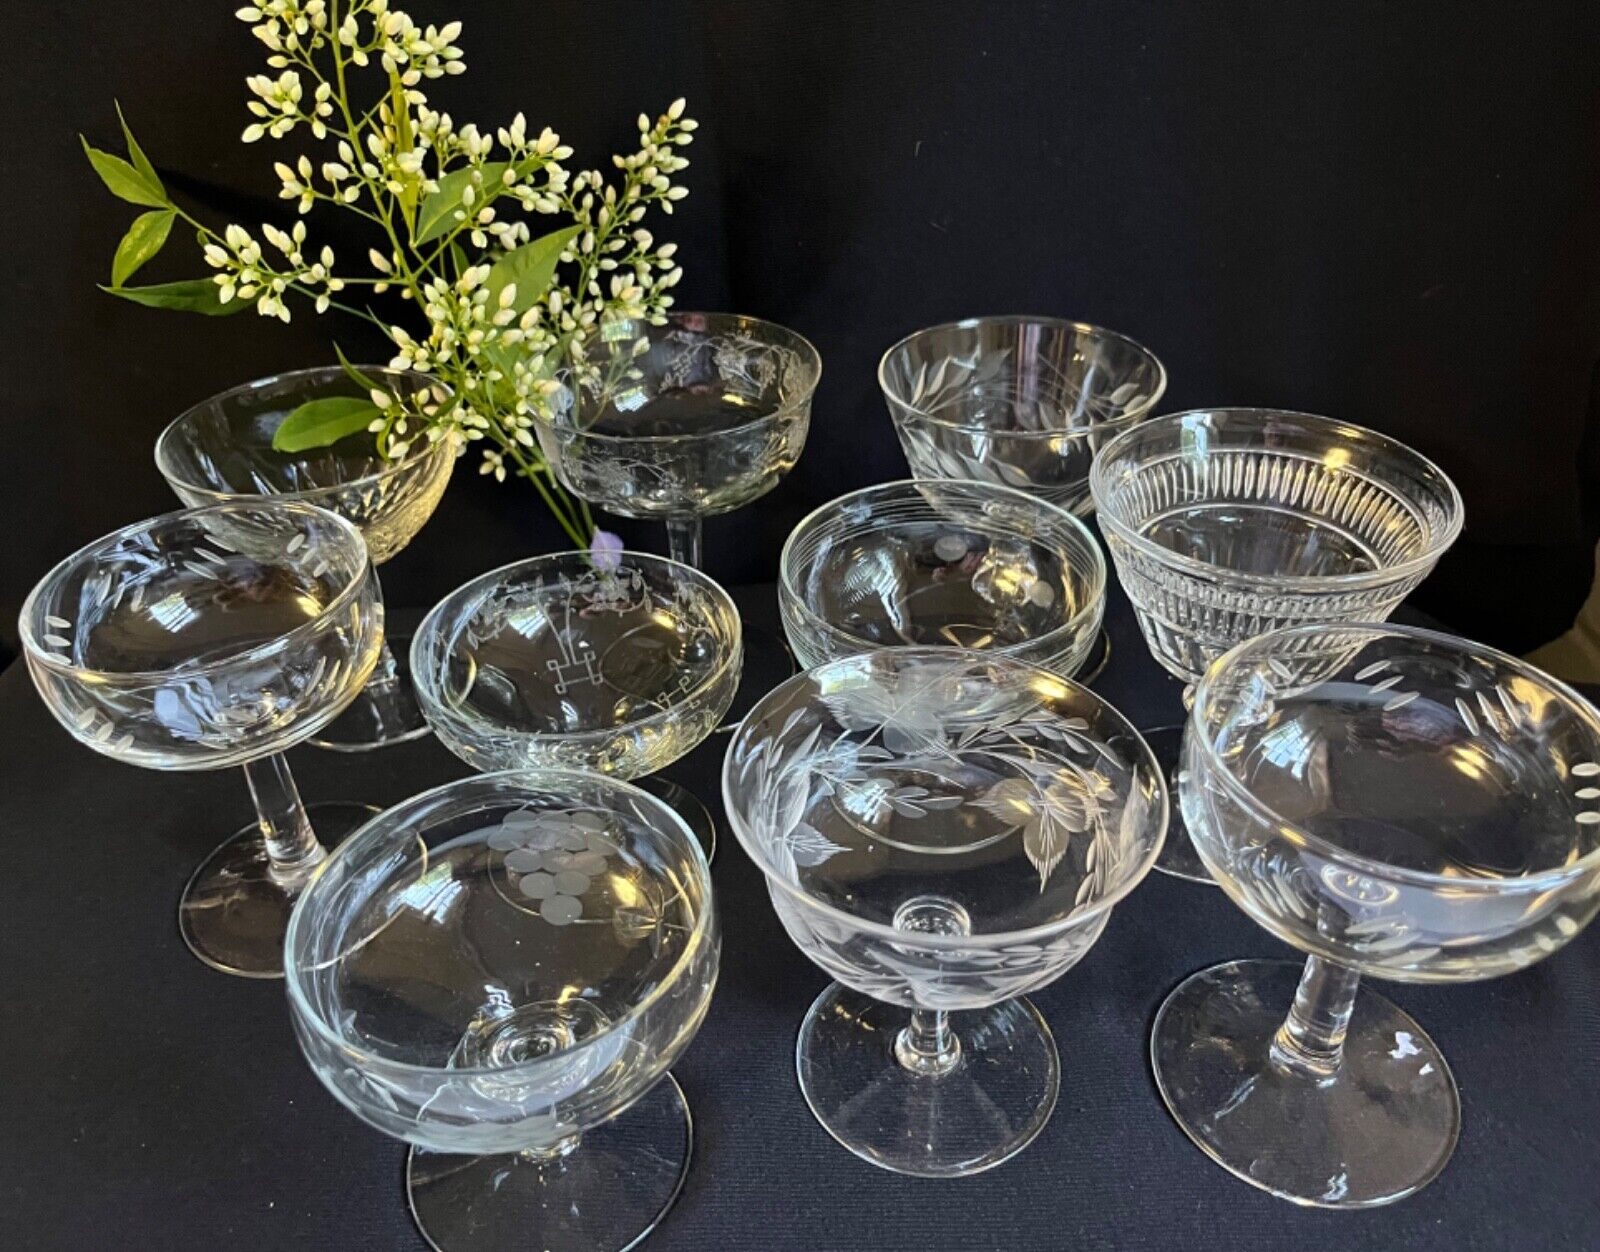 Lot of 10 vintage glass stemware, vaired designs, formal or casual use